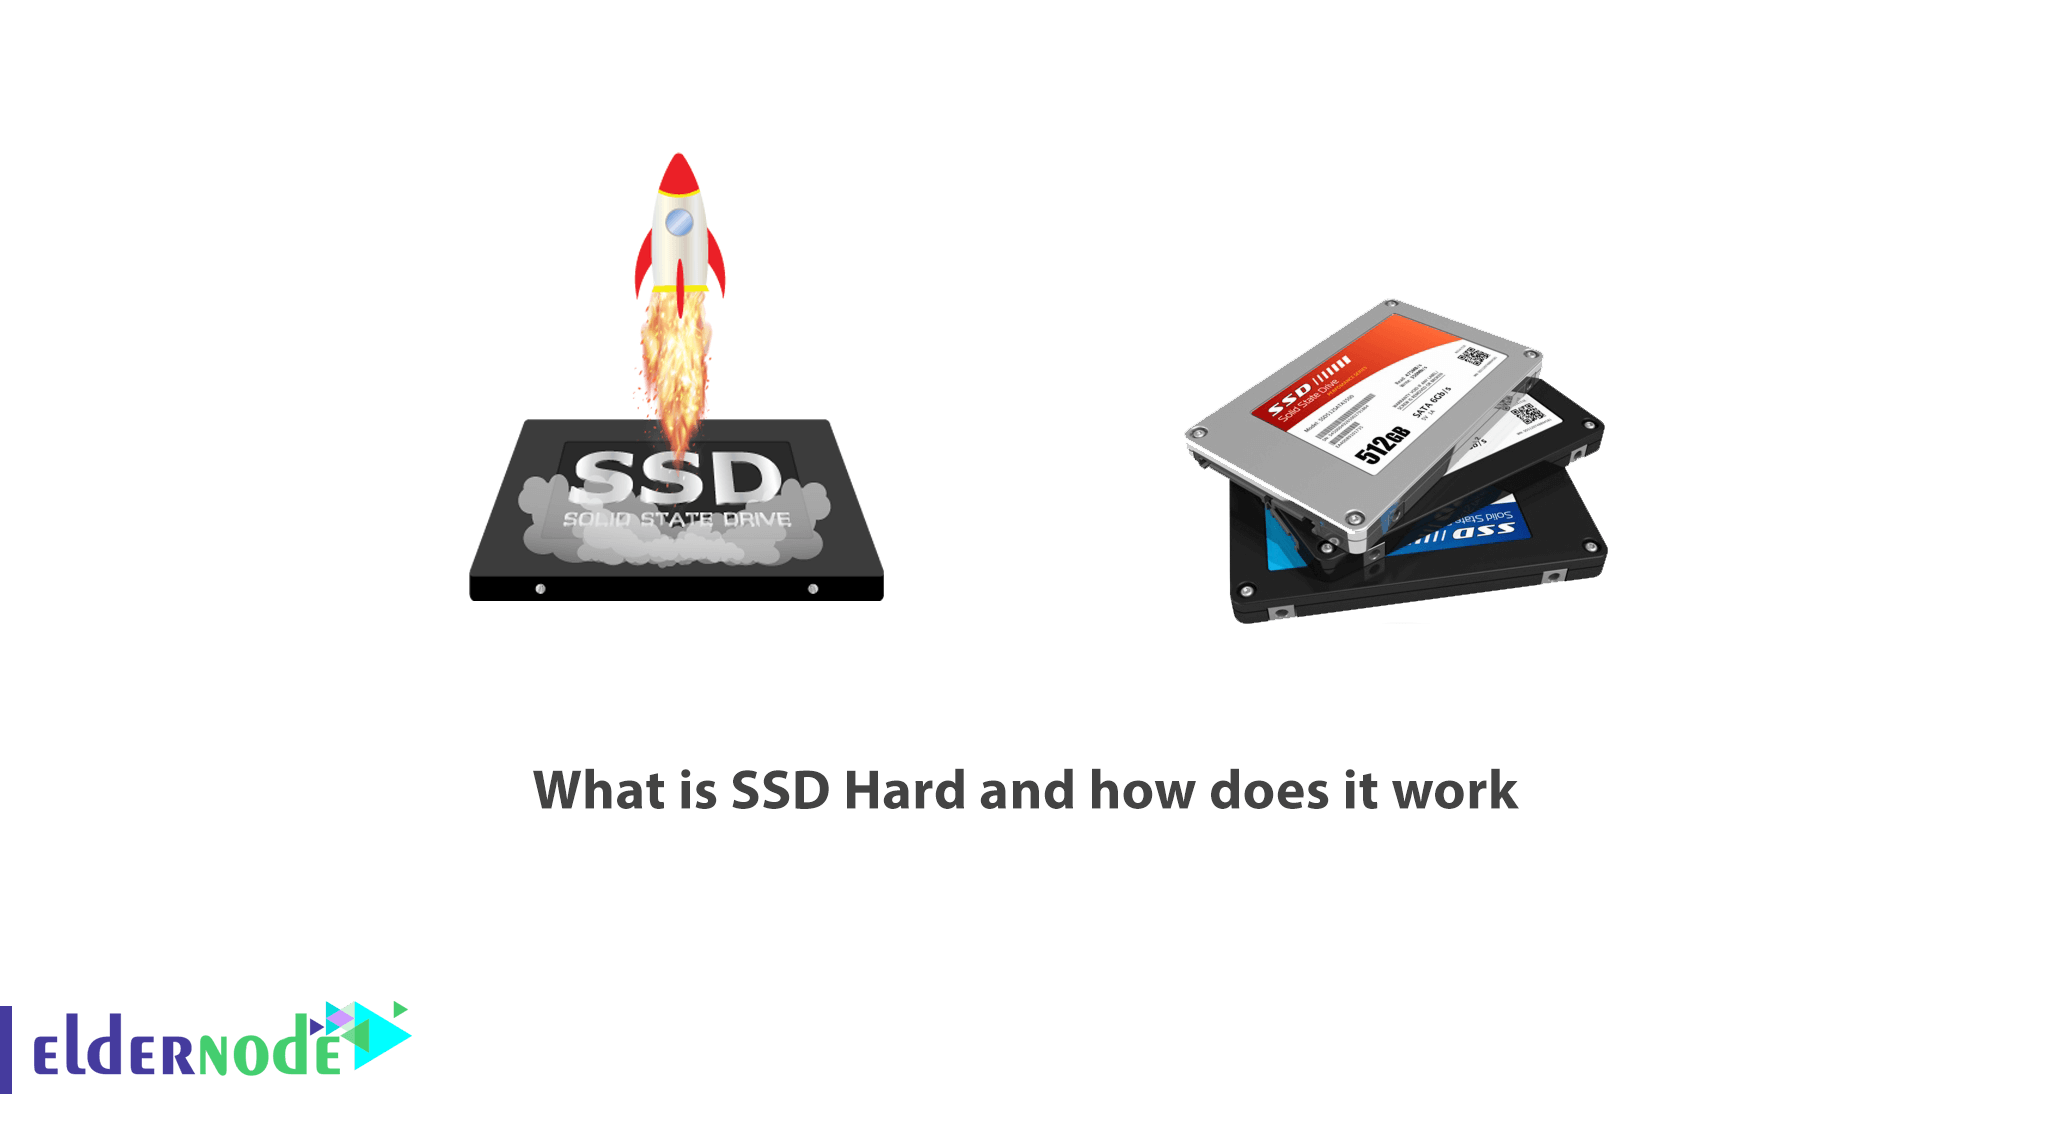 What is SSD Hard and how does it work